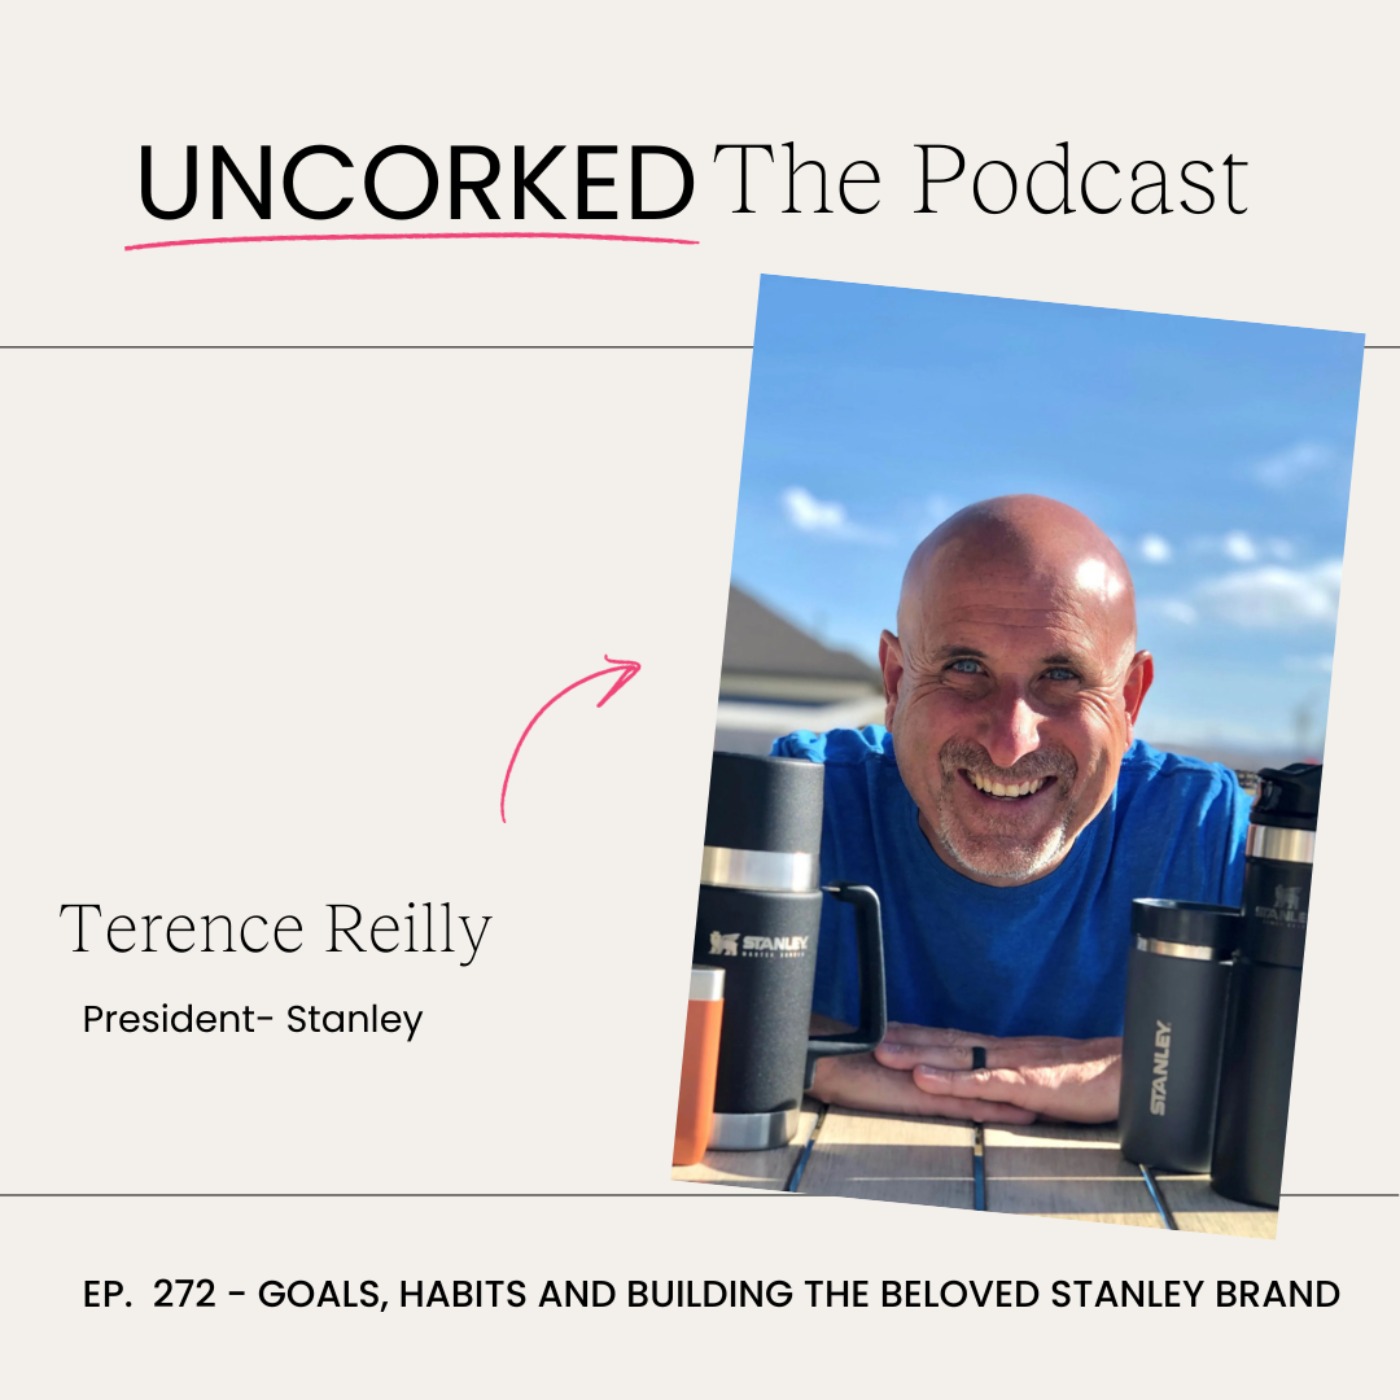 Goals, Habits and Building the Beloved Stanley Brand with Terence Reilly